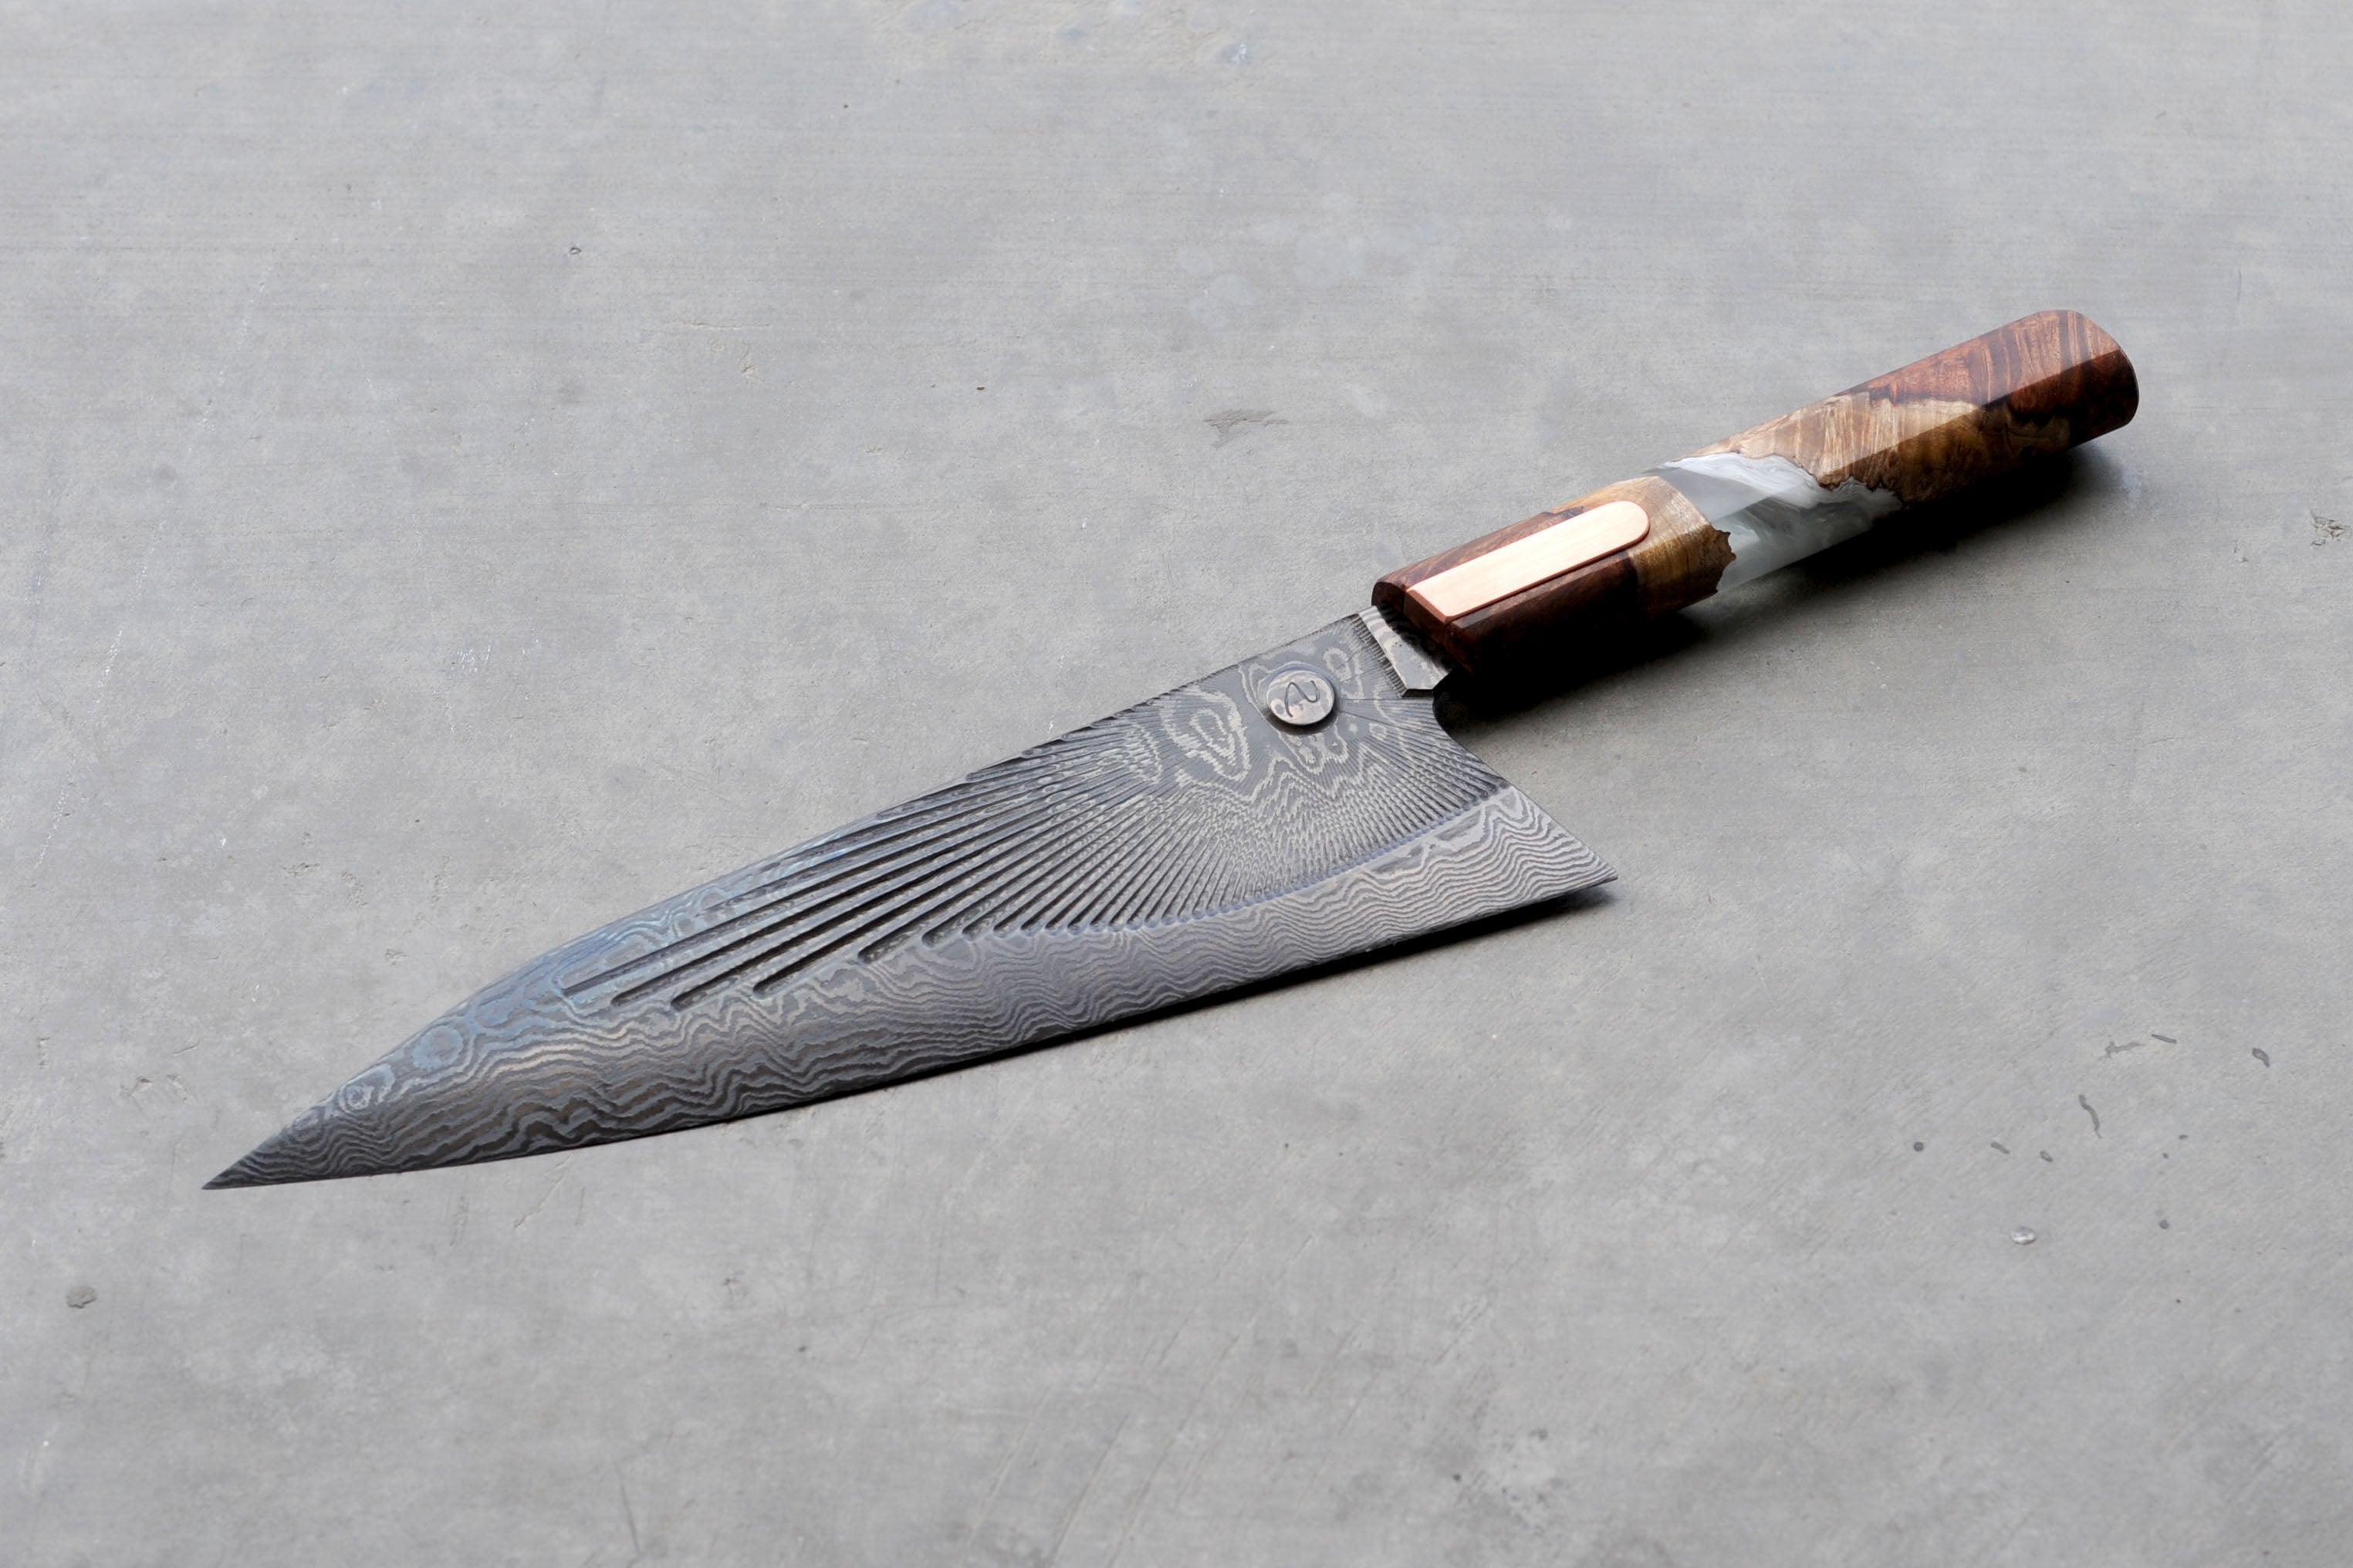 Amboyna burl & Copper Valkyrie gyuto -- Available September 23, 10AM Pacific